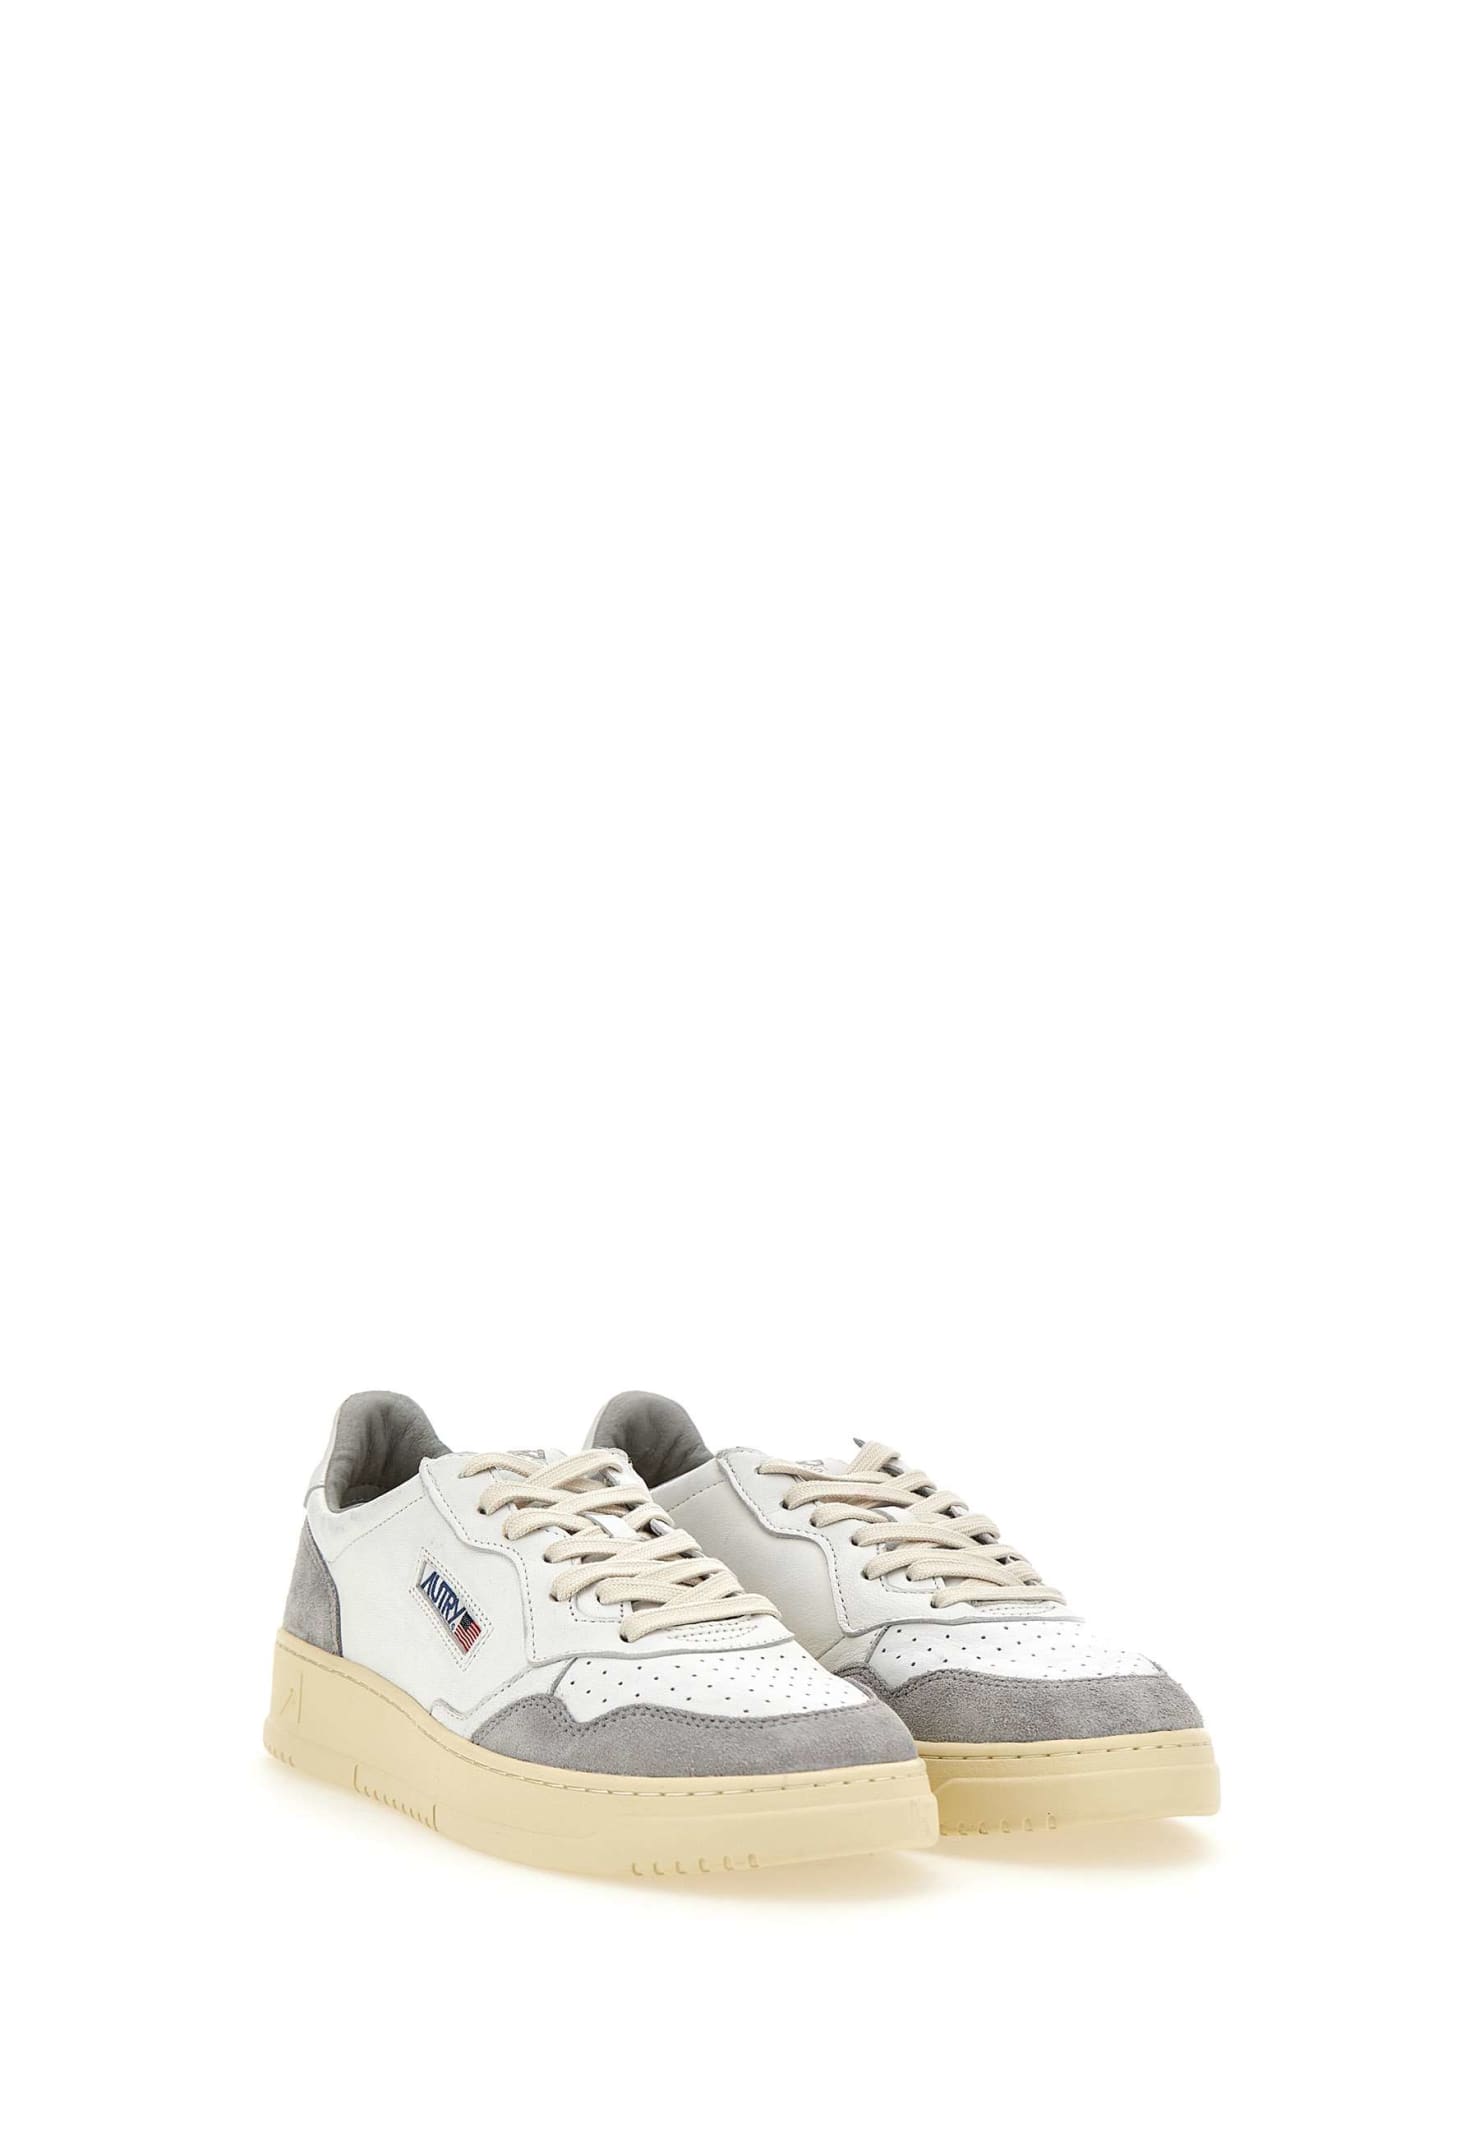 Shop Autry Aulmgs25 Leather Sneakers In White-grey